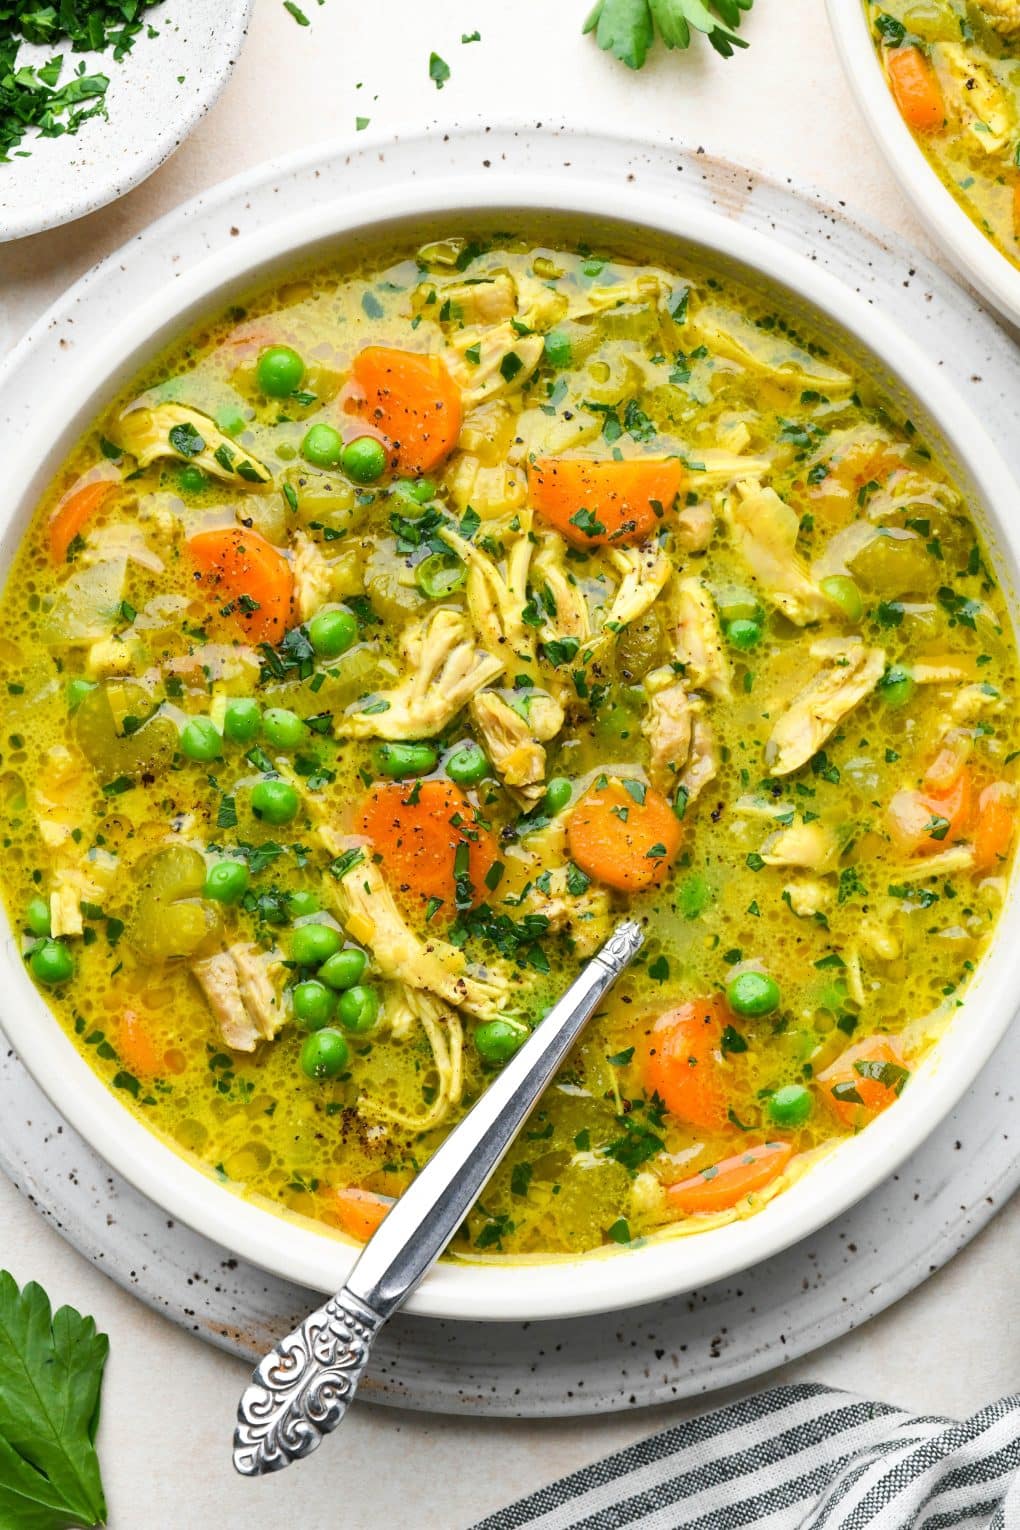 A large shallow bowl of bright yellow turmeric chicken soup with peas and fresh herbs. On a cream colored background.